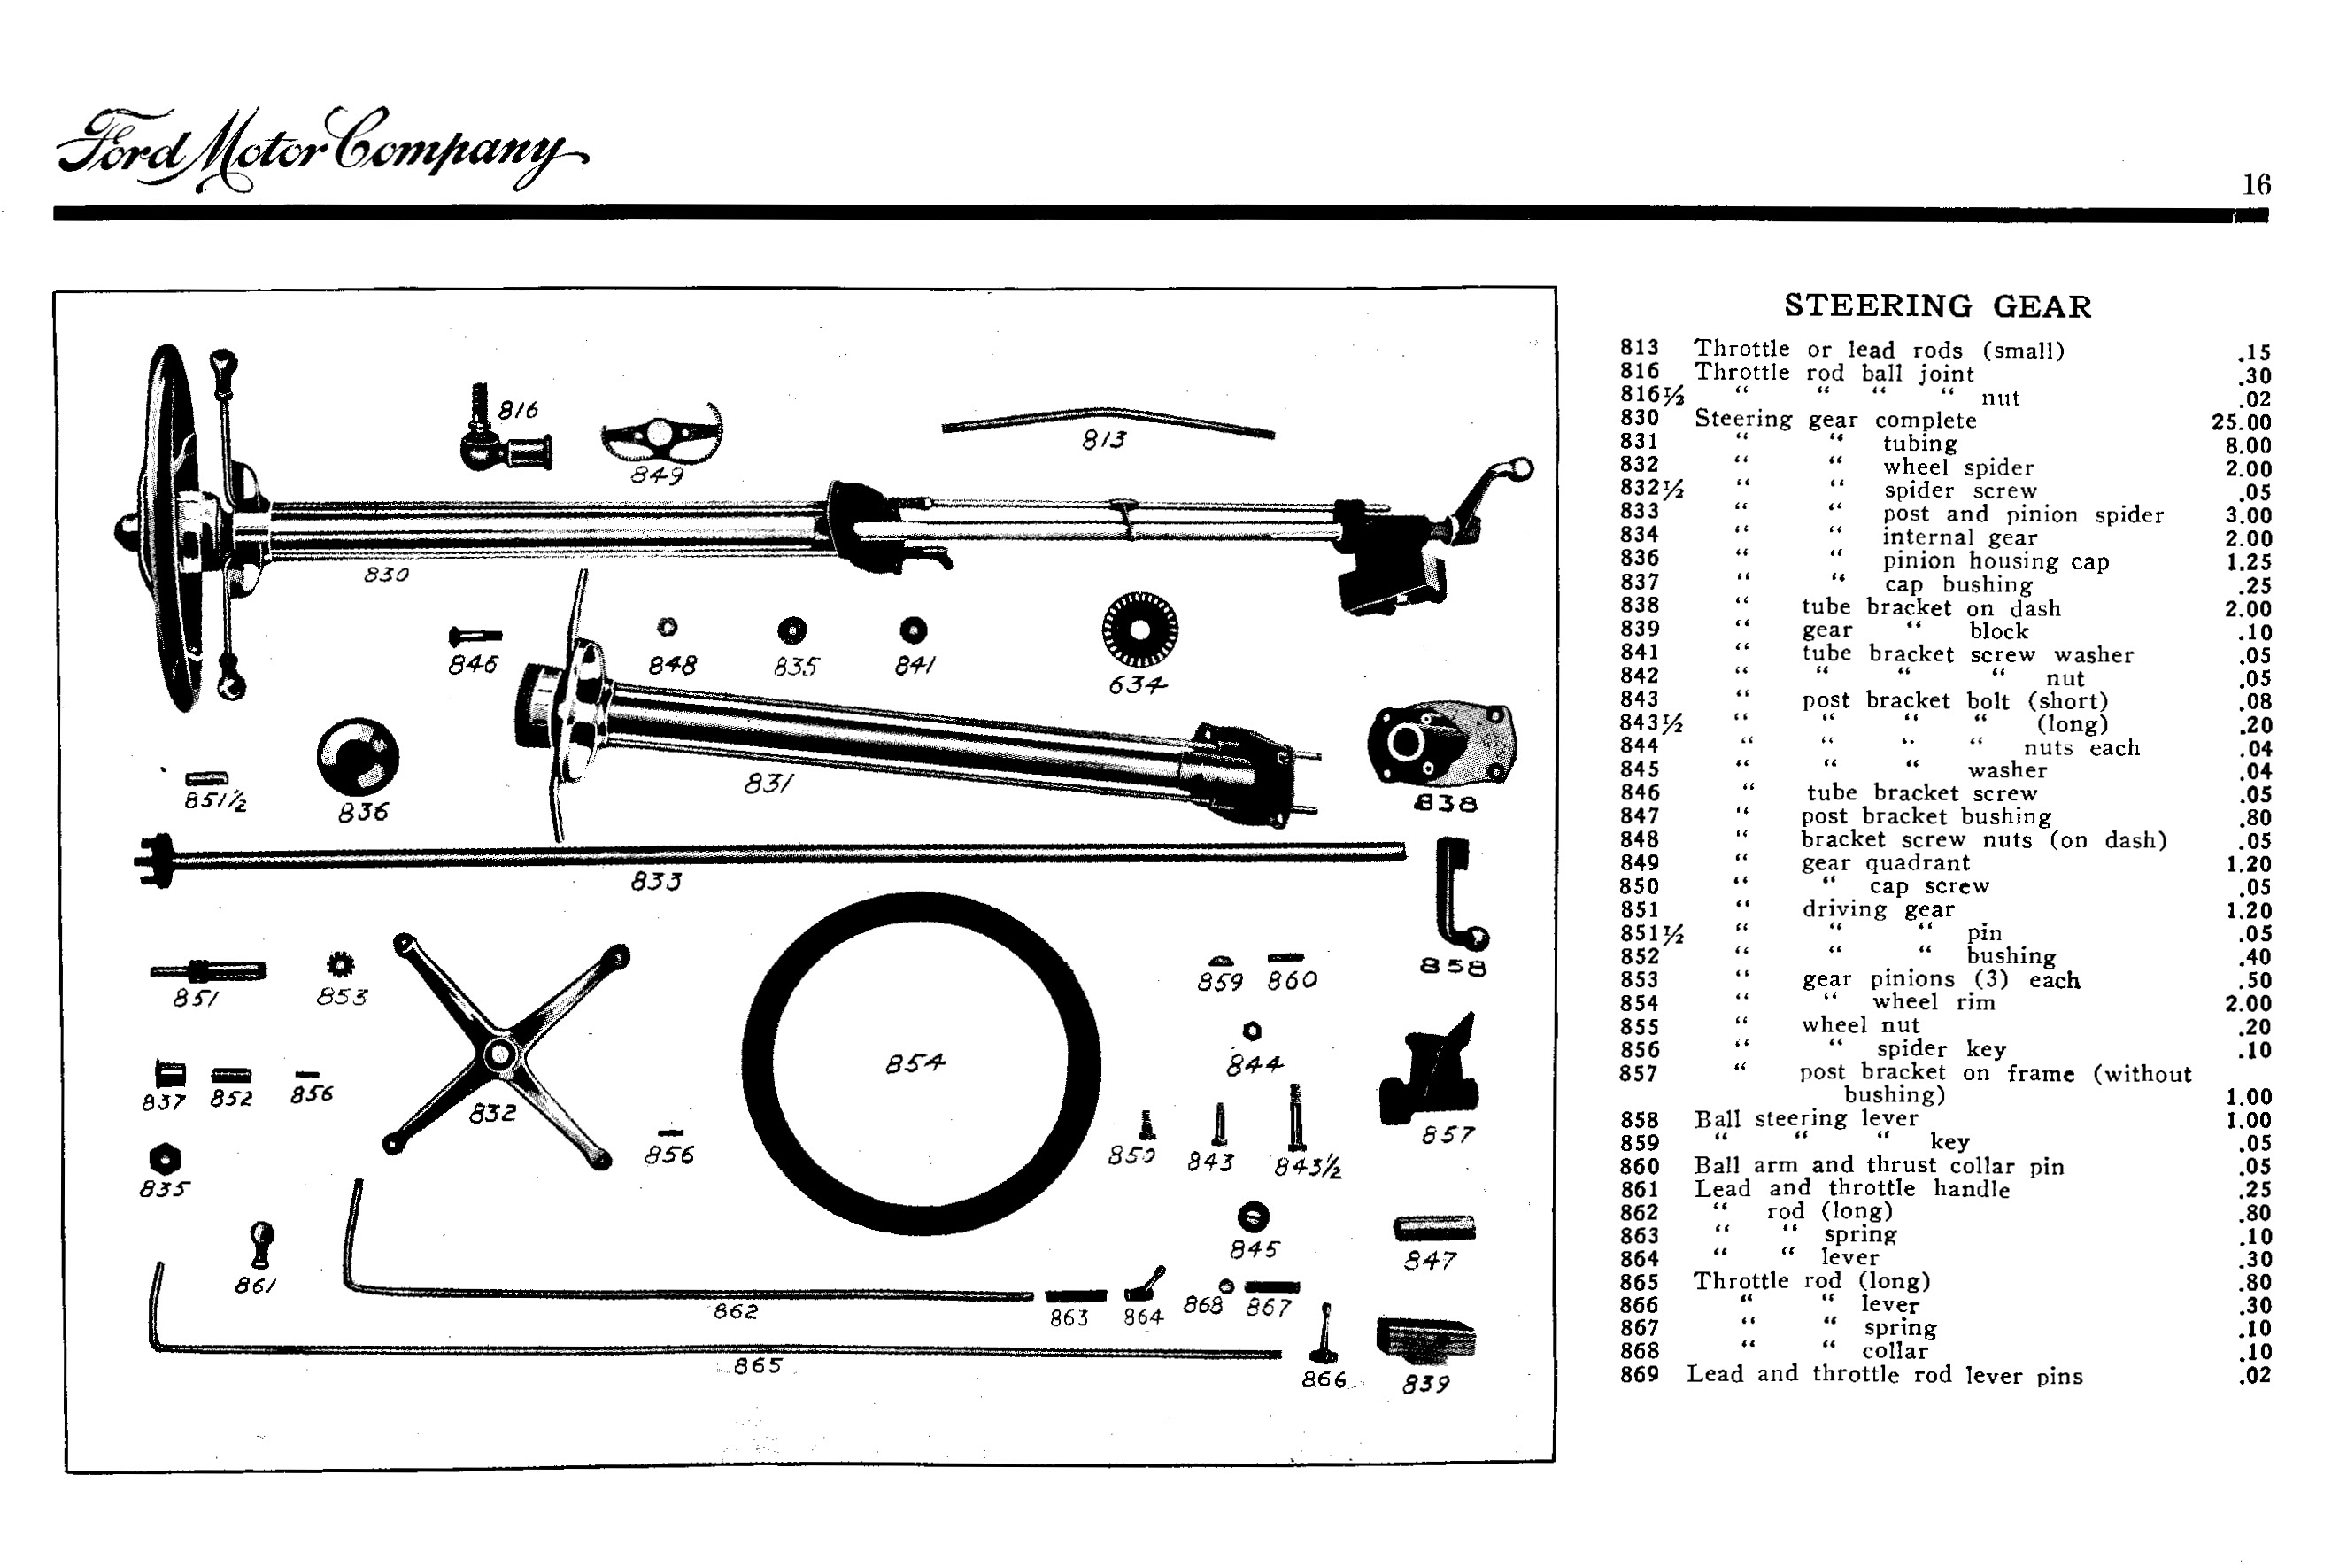 1907_Ford_Roadster_Parts_List-16